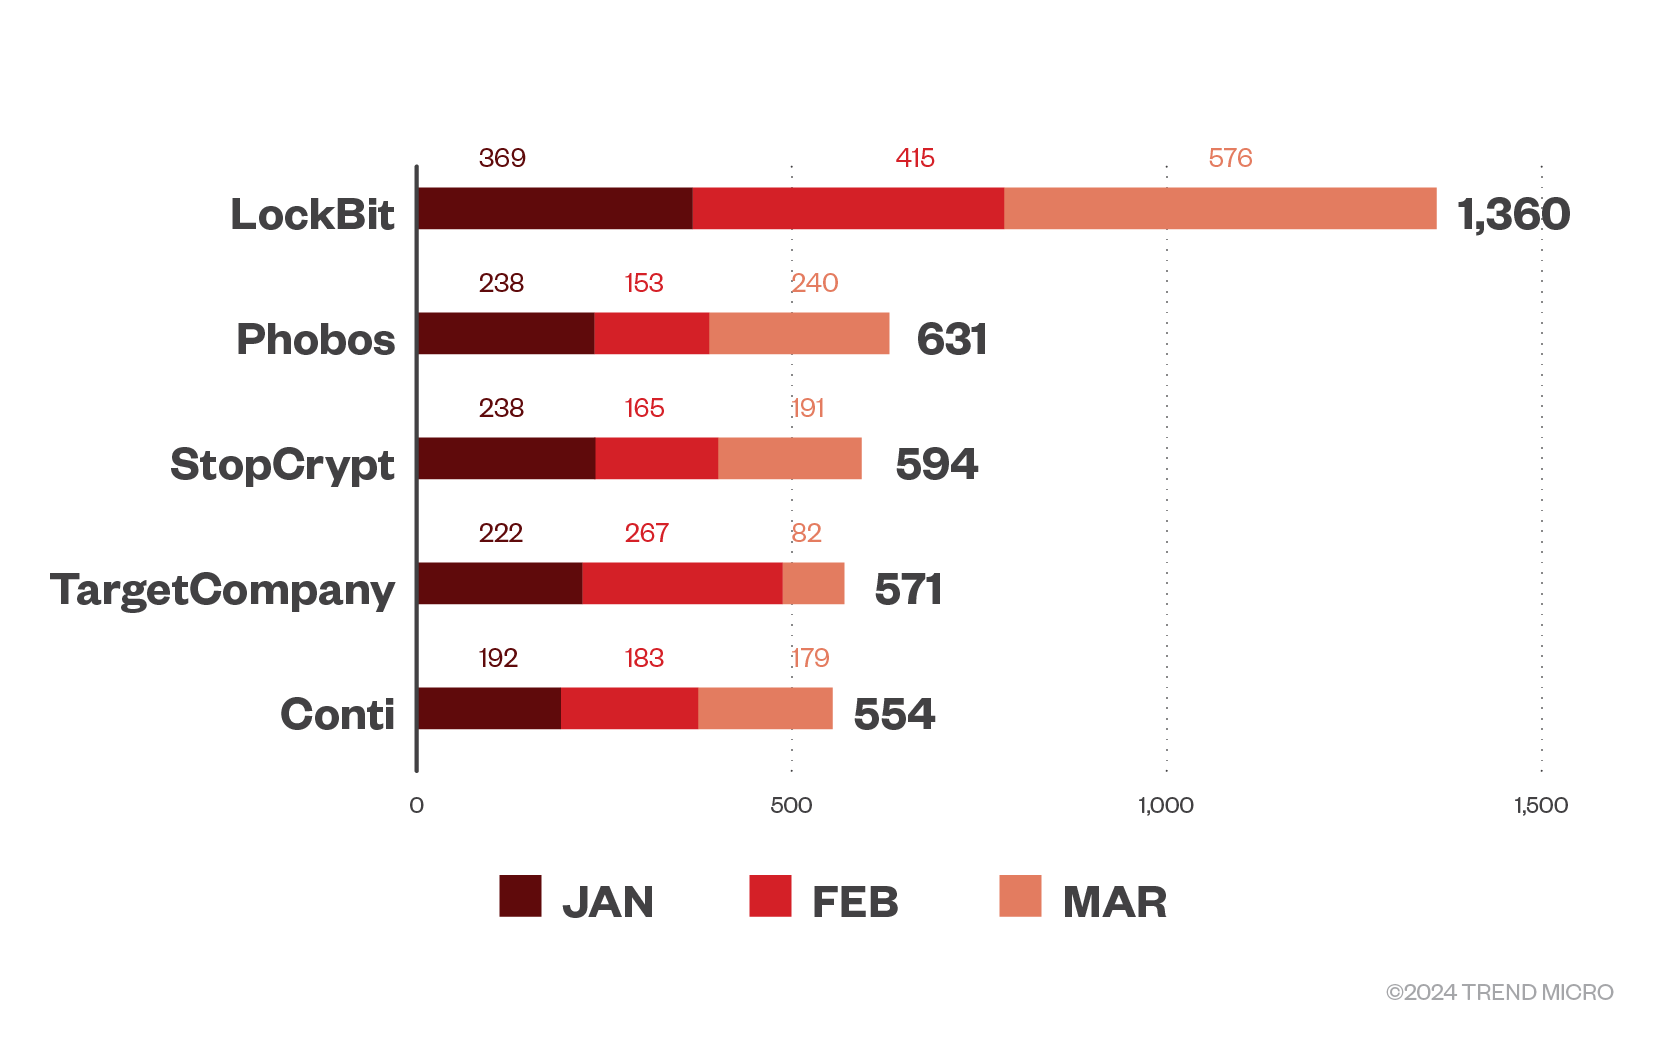 The top five ransomware families in machines per month for the first quarter of 2024, in terms of file detections